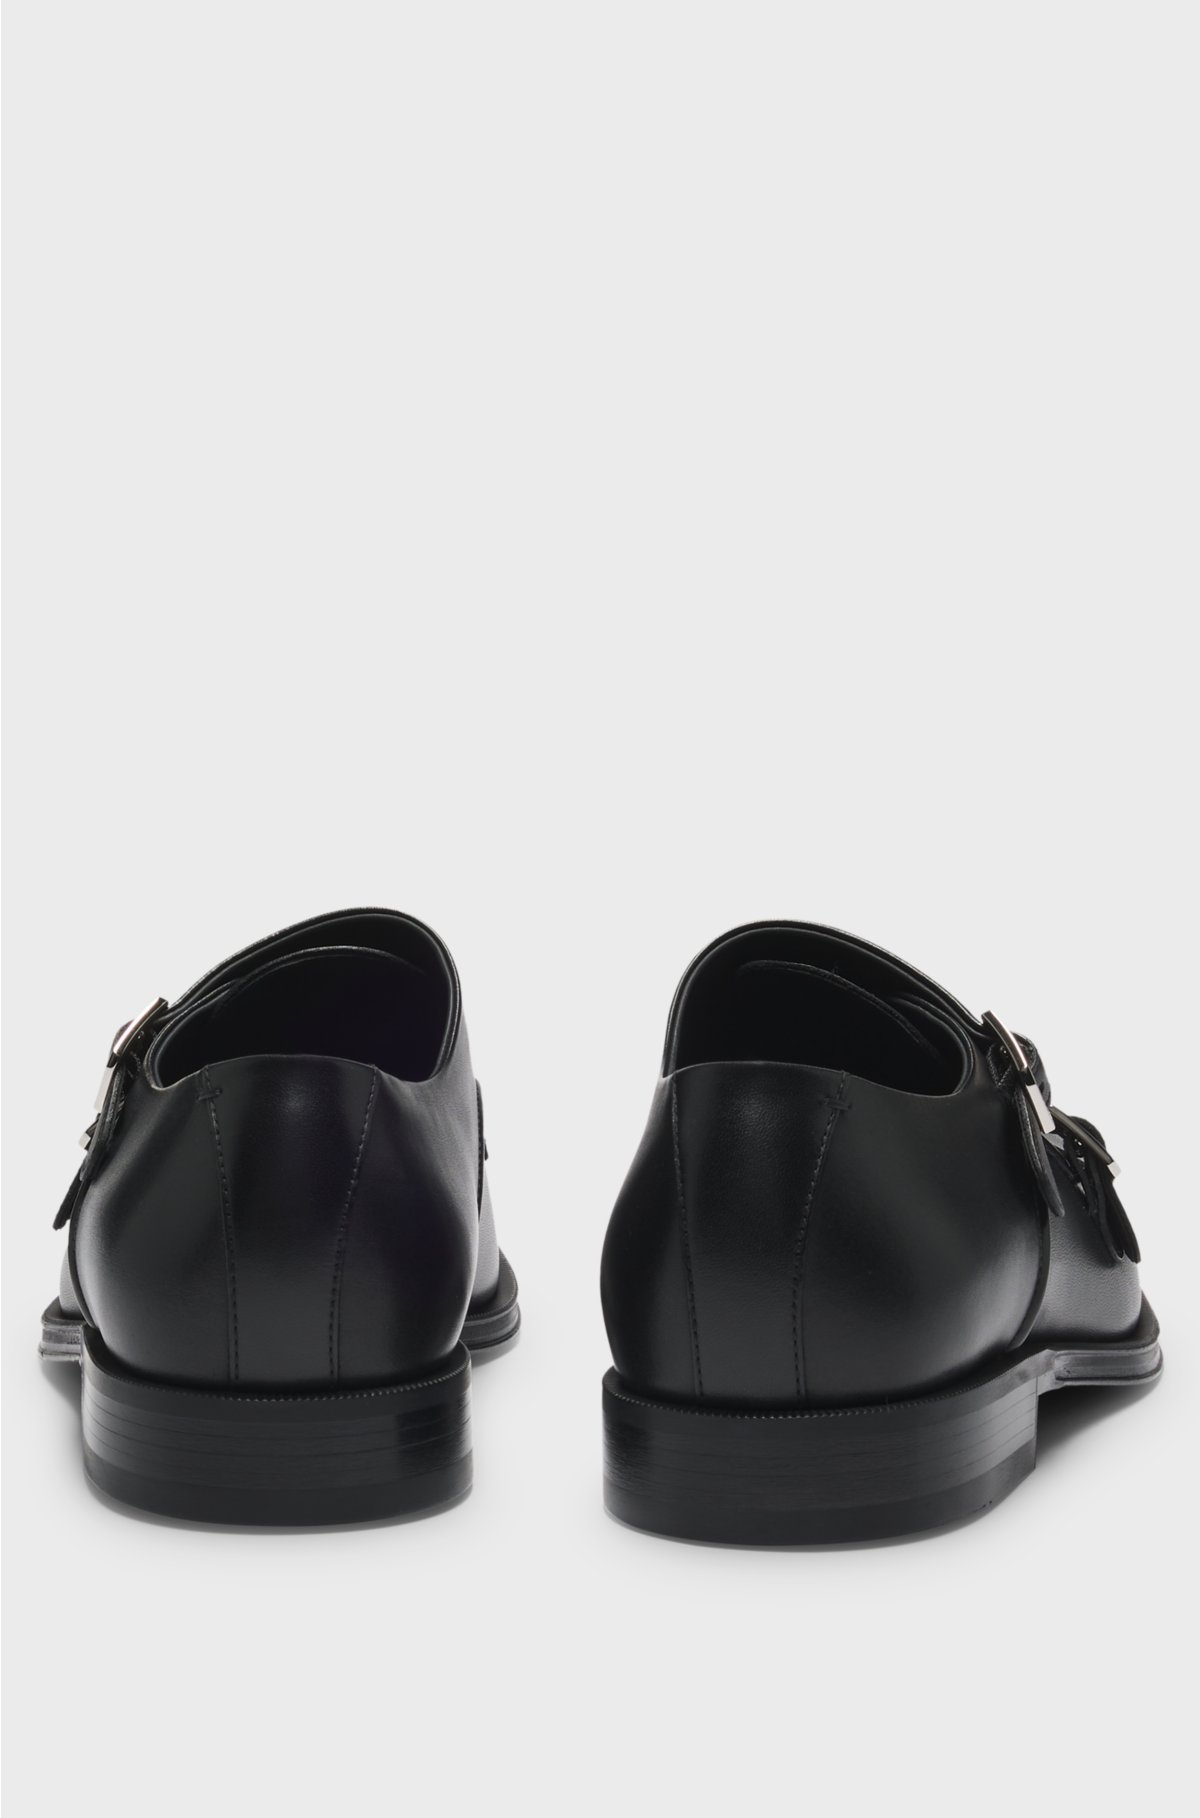 Cap-toe double monk shoes in leather, Black